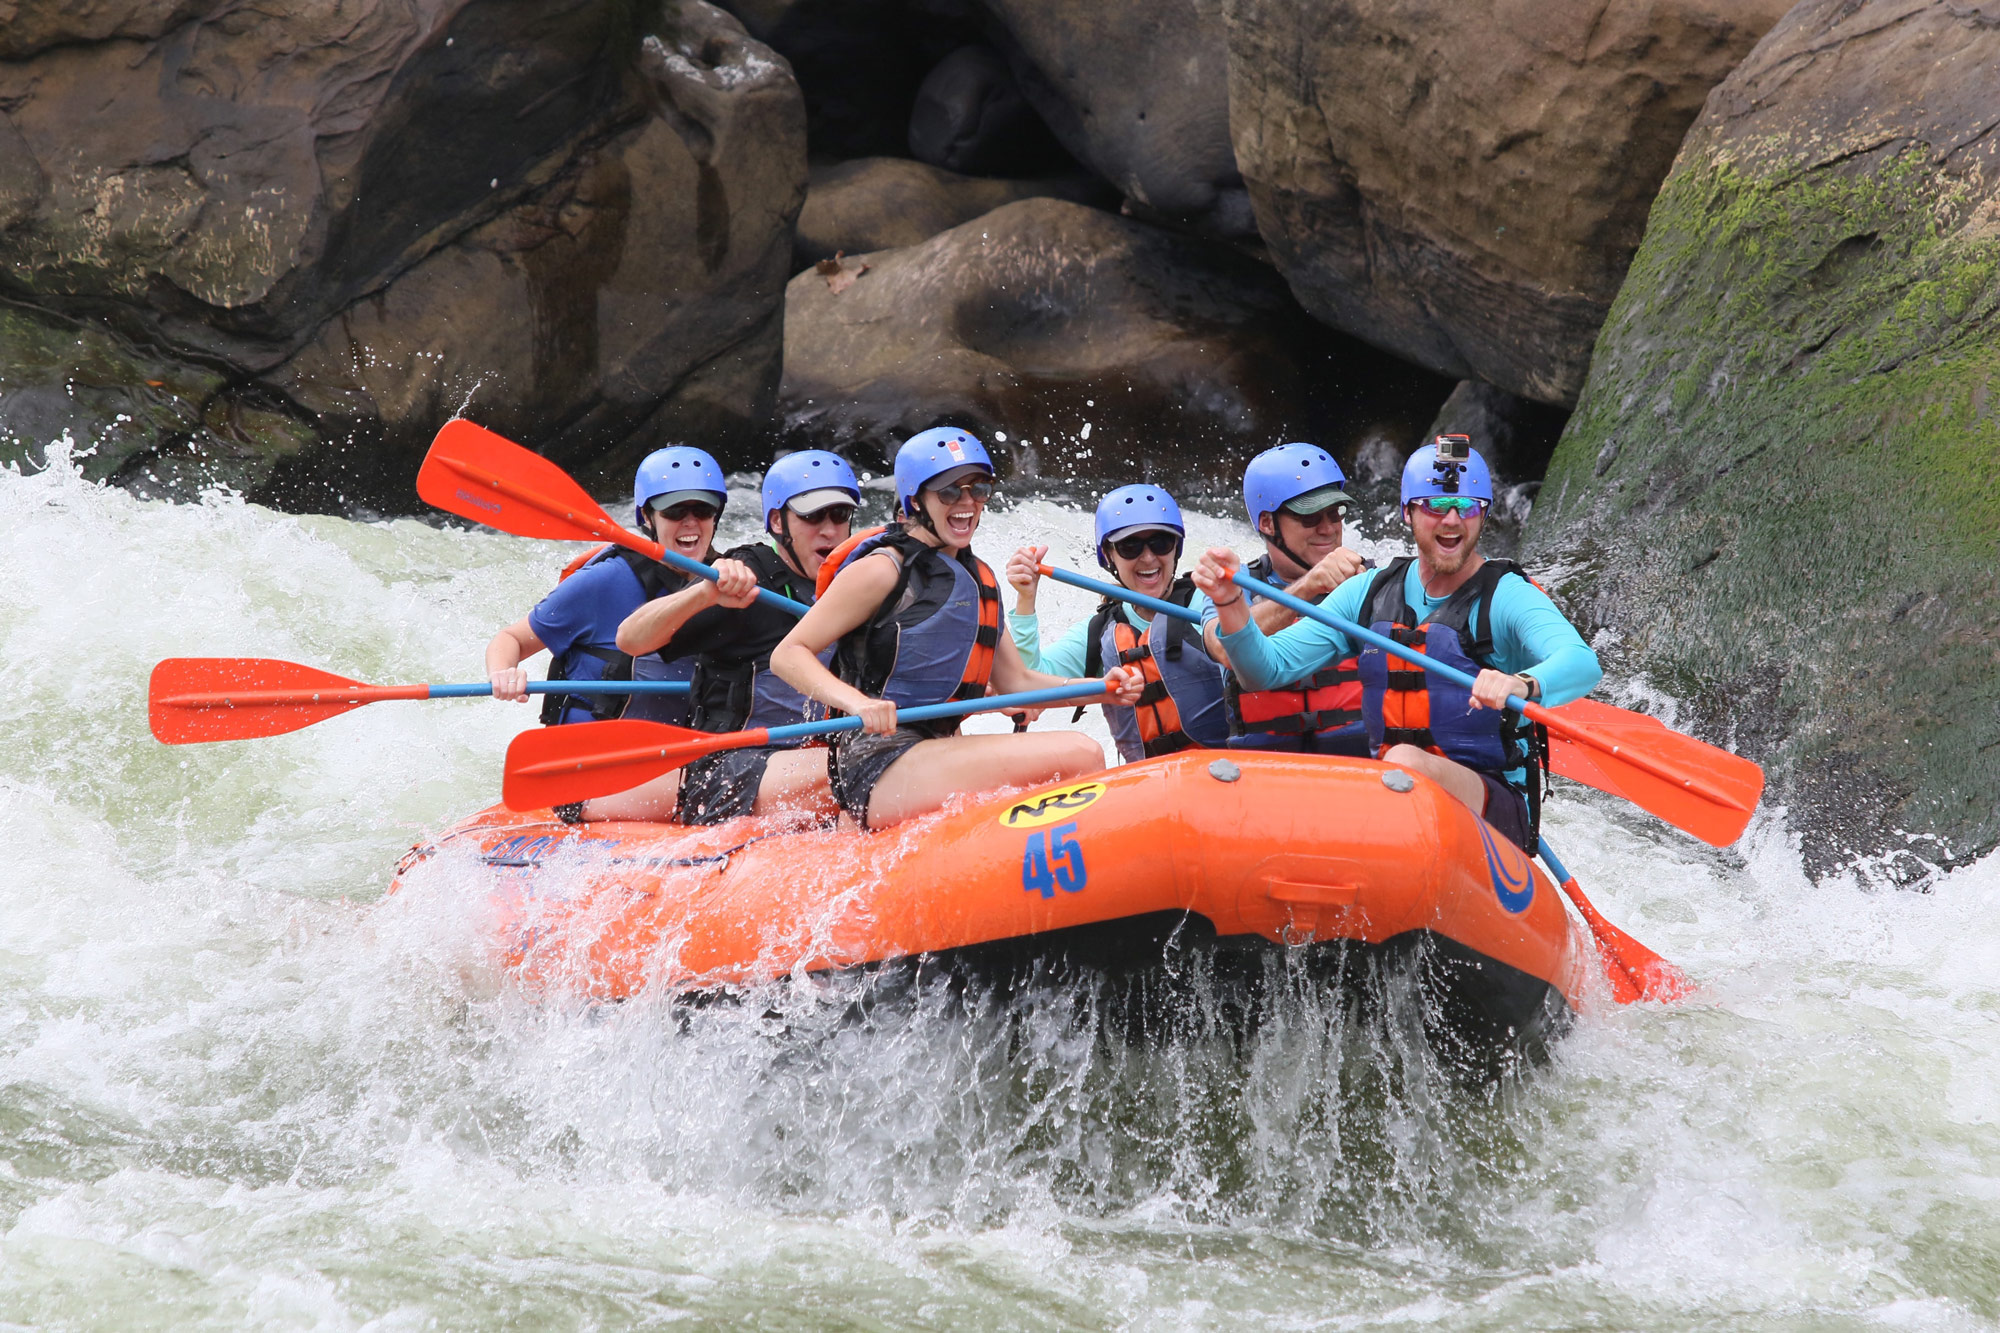 Adams River Rafting: Adams River Rafting is a family friendly white water adventure company that has been in operation since 1983. Our 2.5-hour round-trip rafting experience takes you down the Adams River, home […]